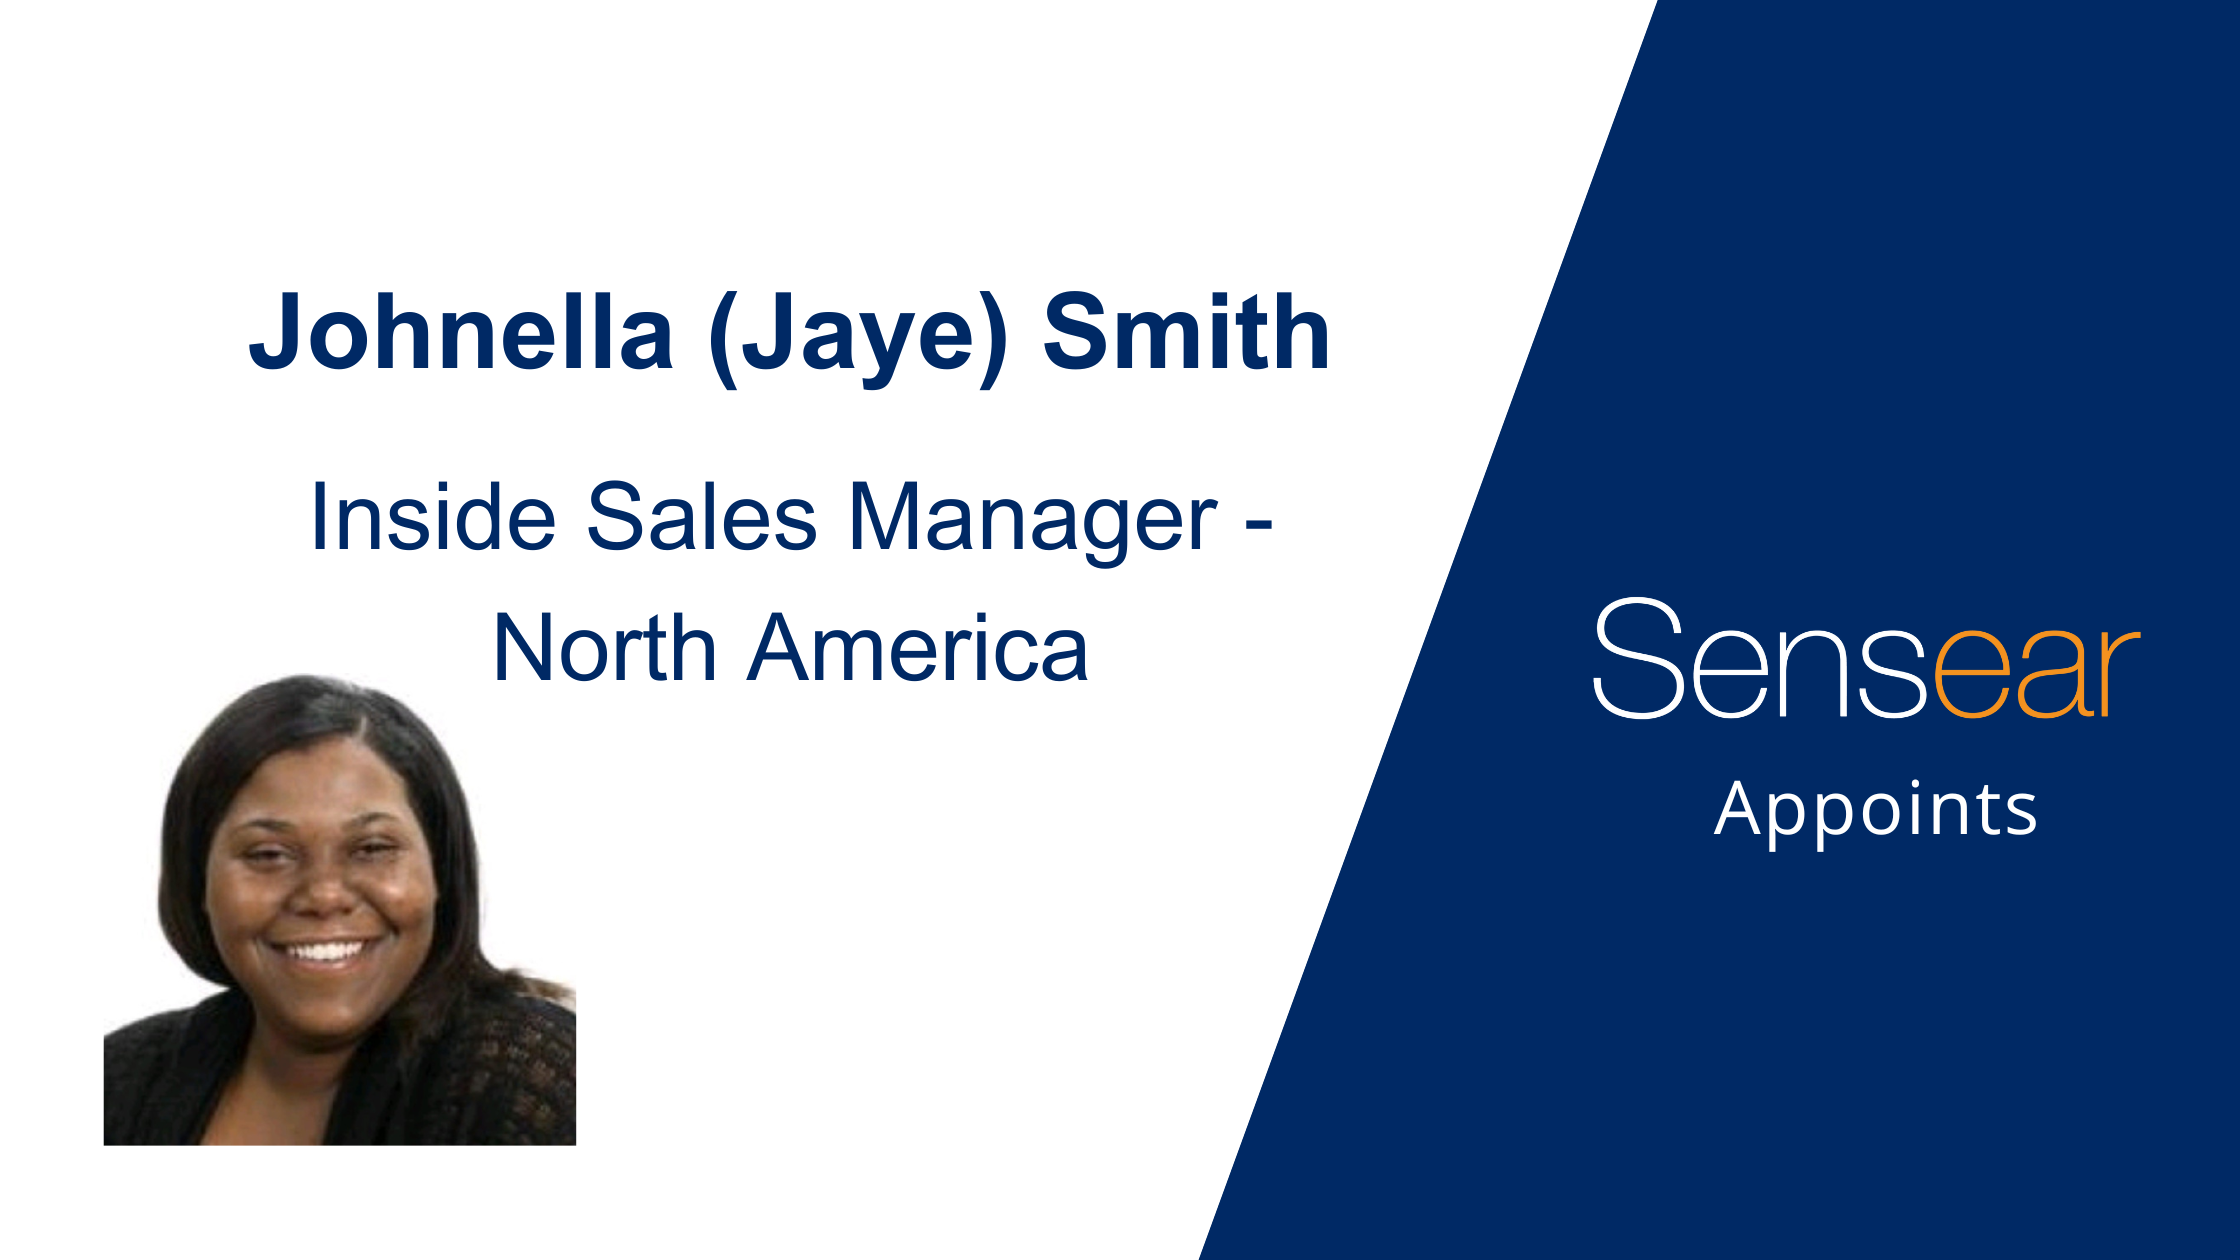 Johnella Smith Joins Sensear as New Inside Sales Manager